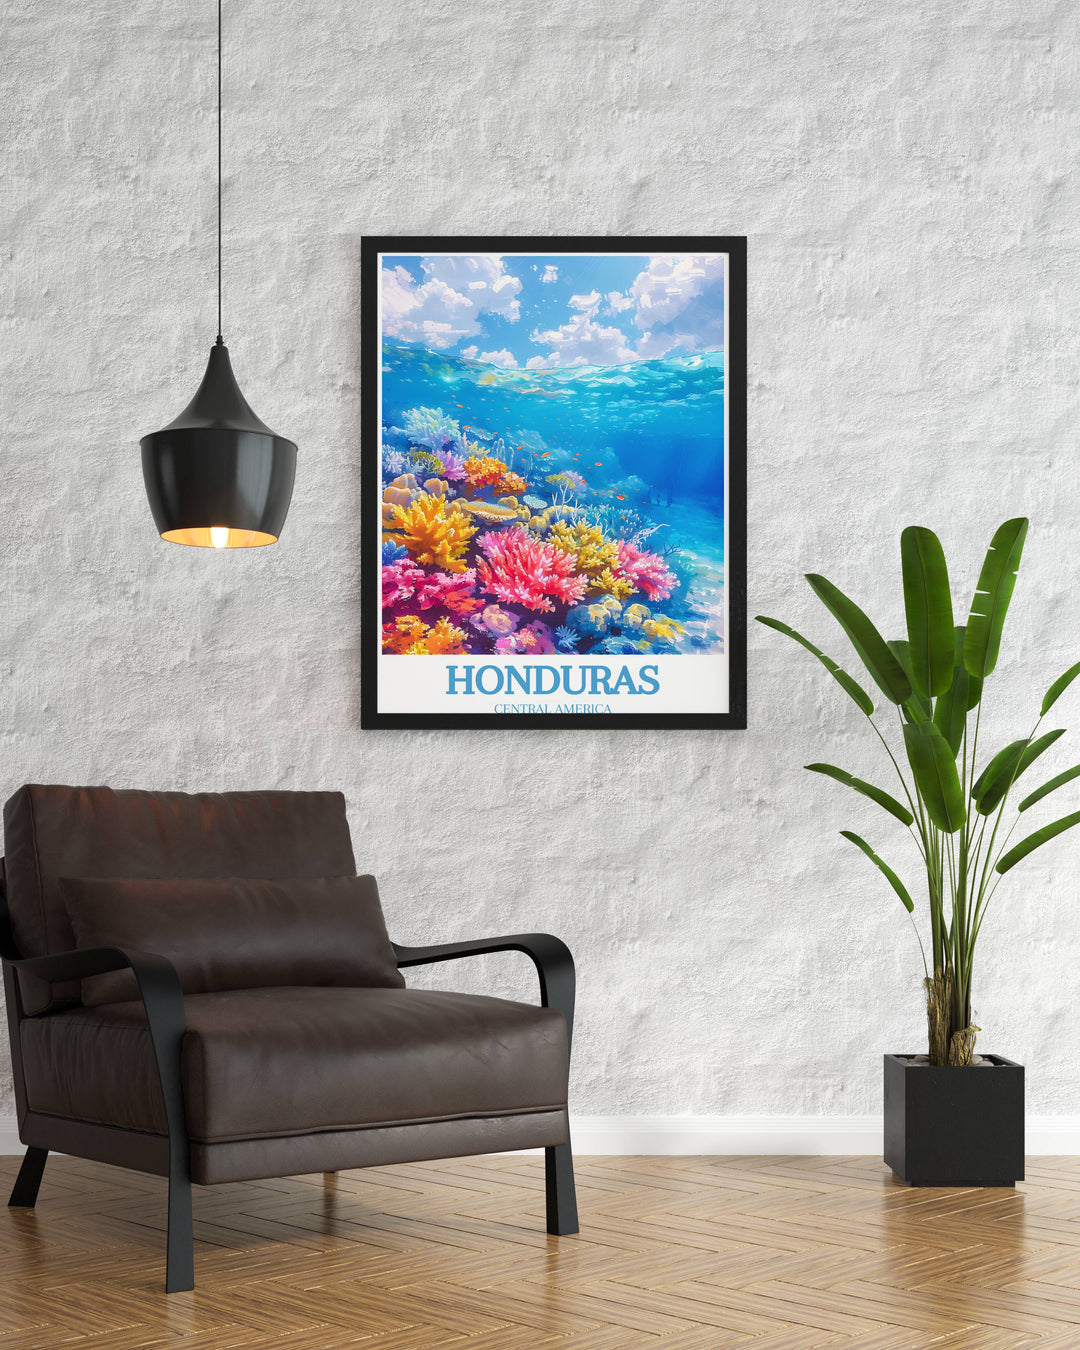 Embark on a journey to explore the mesmerizing beauty of Roatans coral reefs with our exquisite collection of Honduras art prints